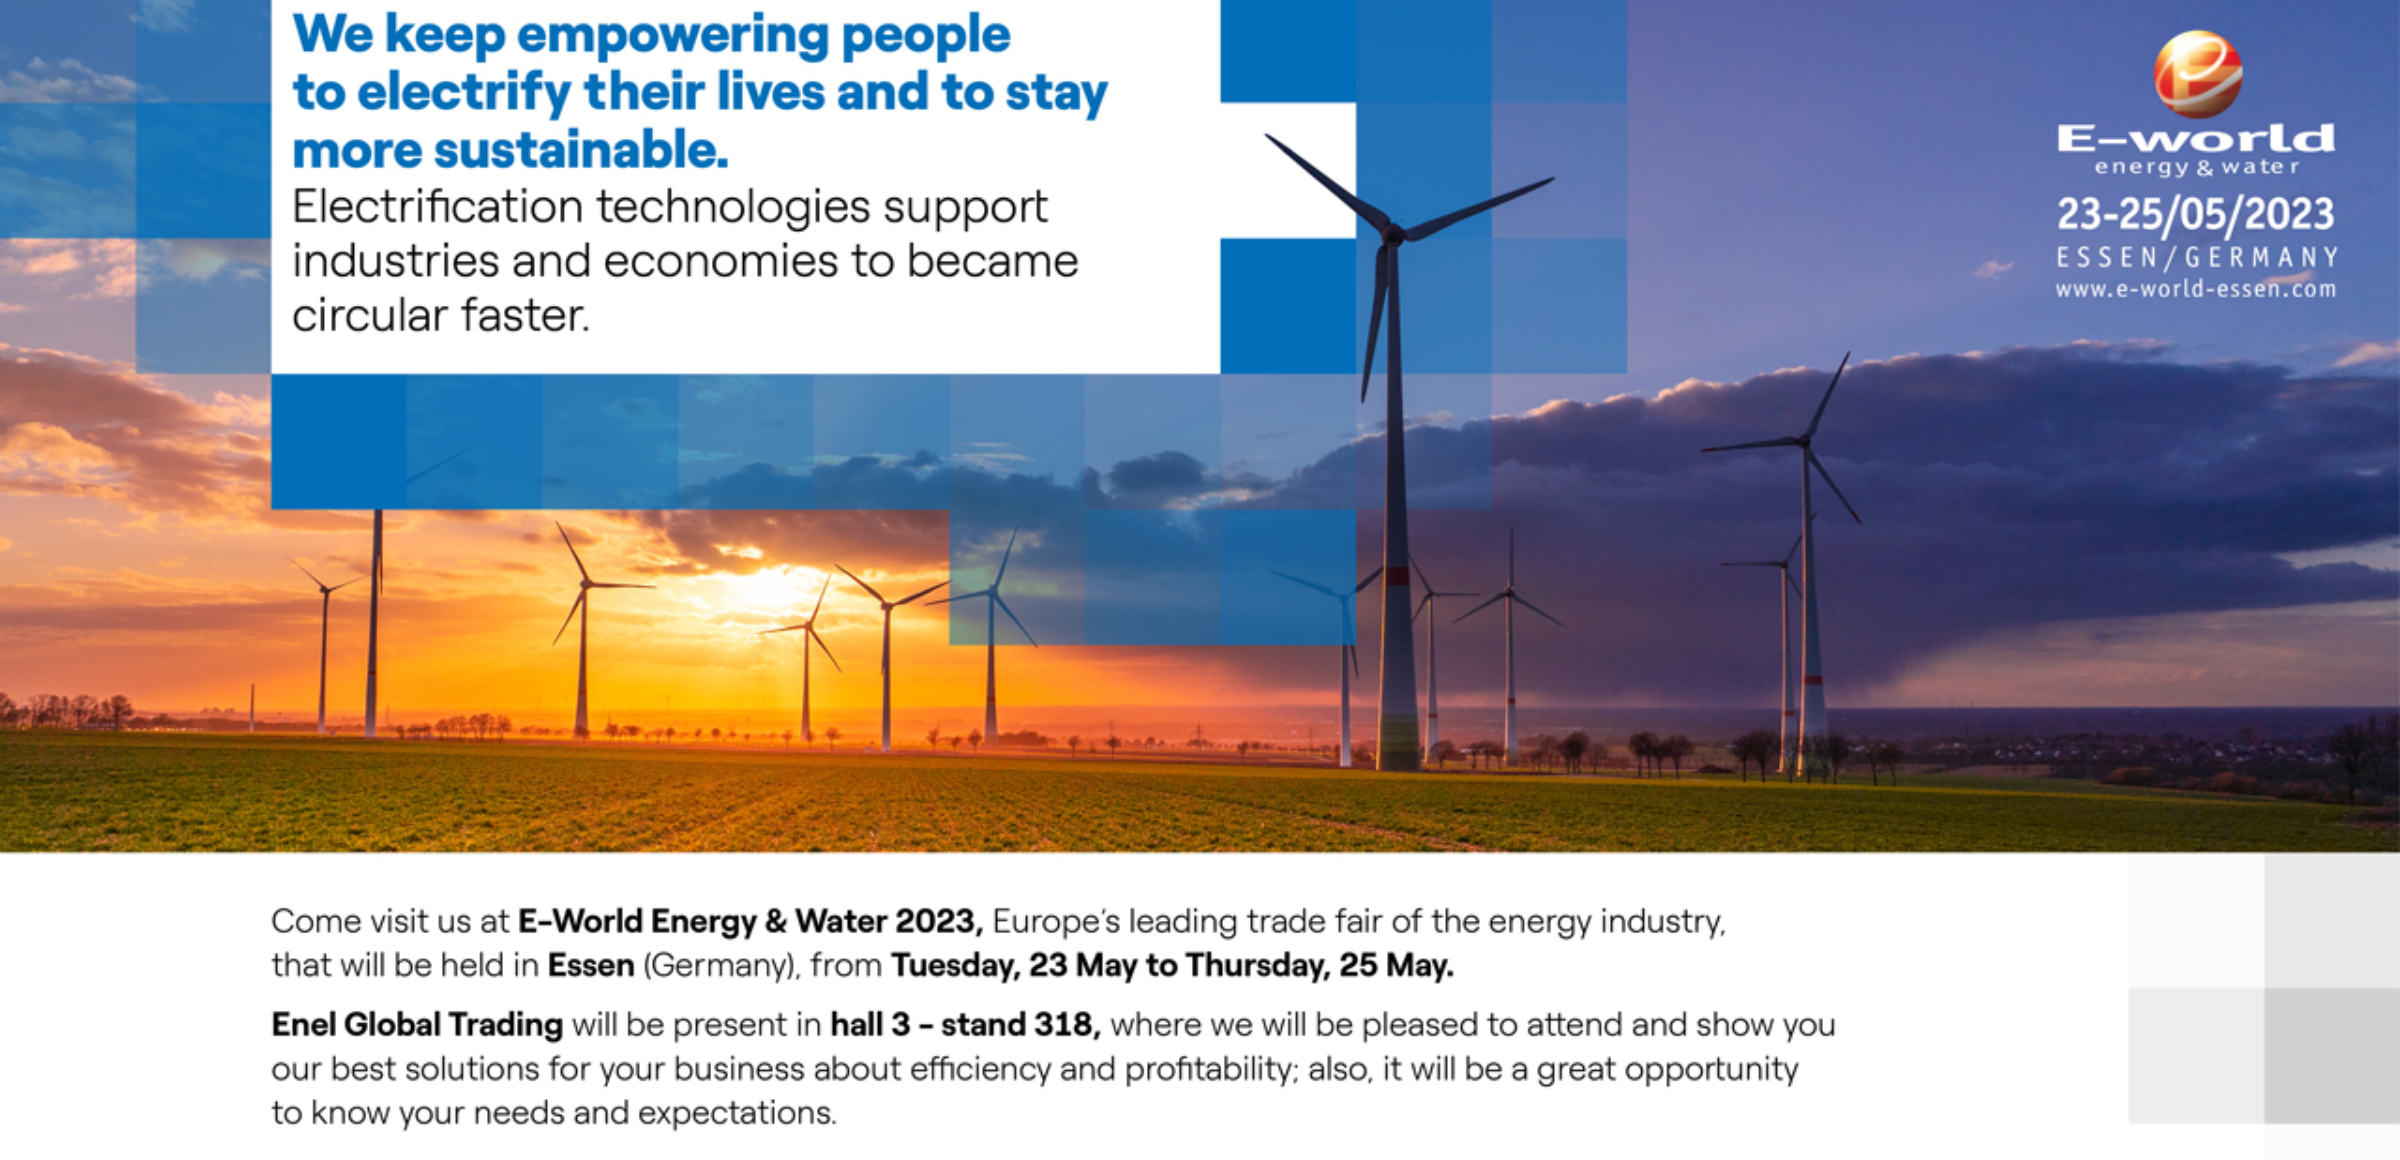 Enel Group - Together, we will change the way the world uses